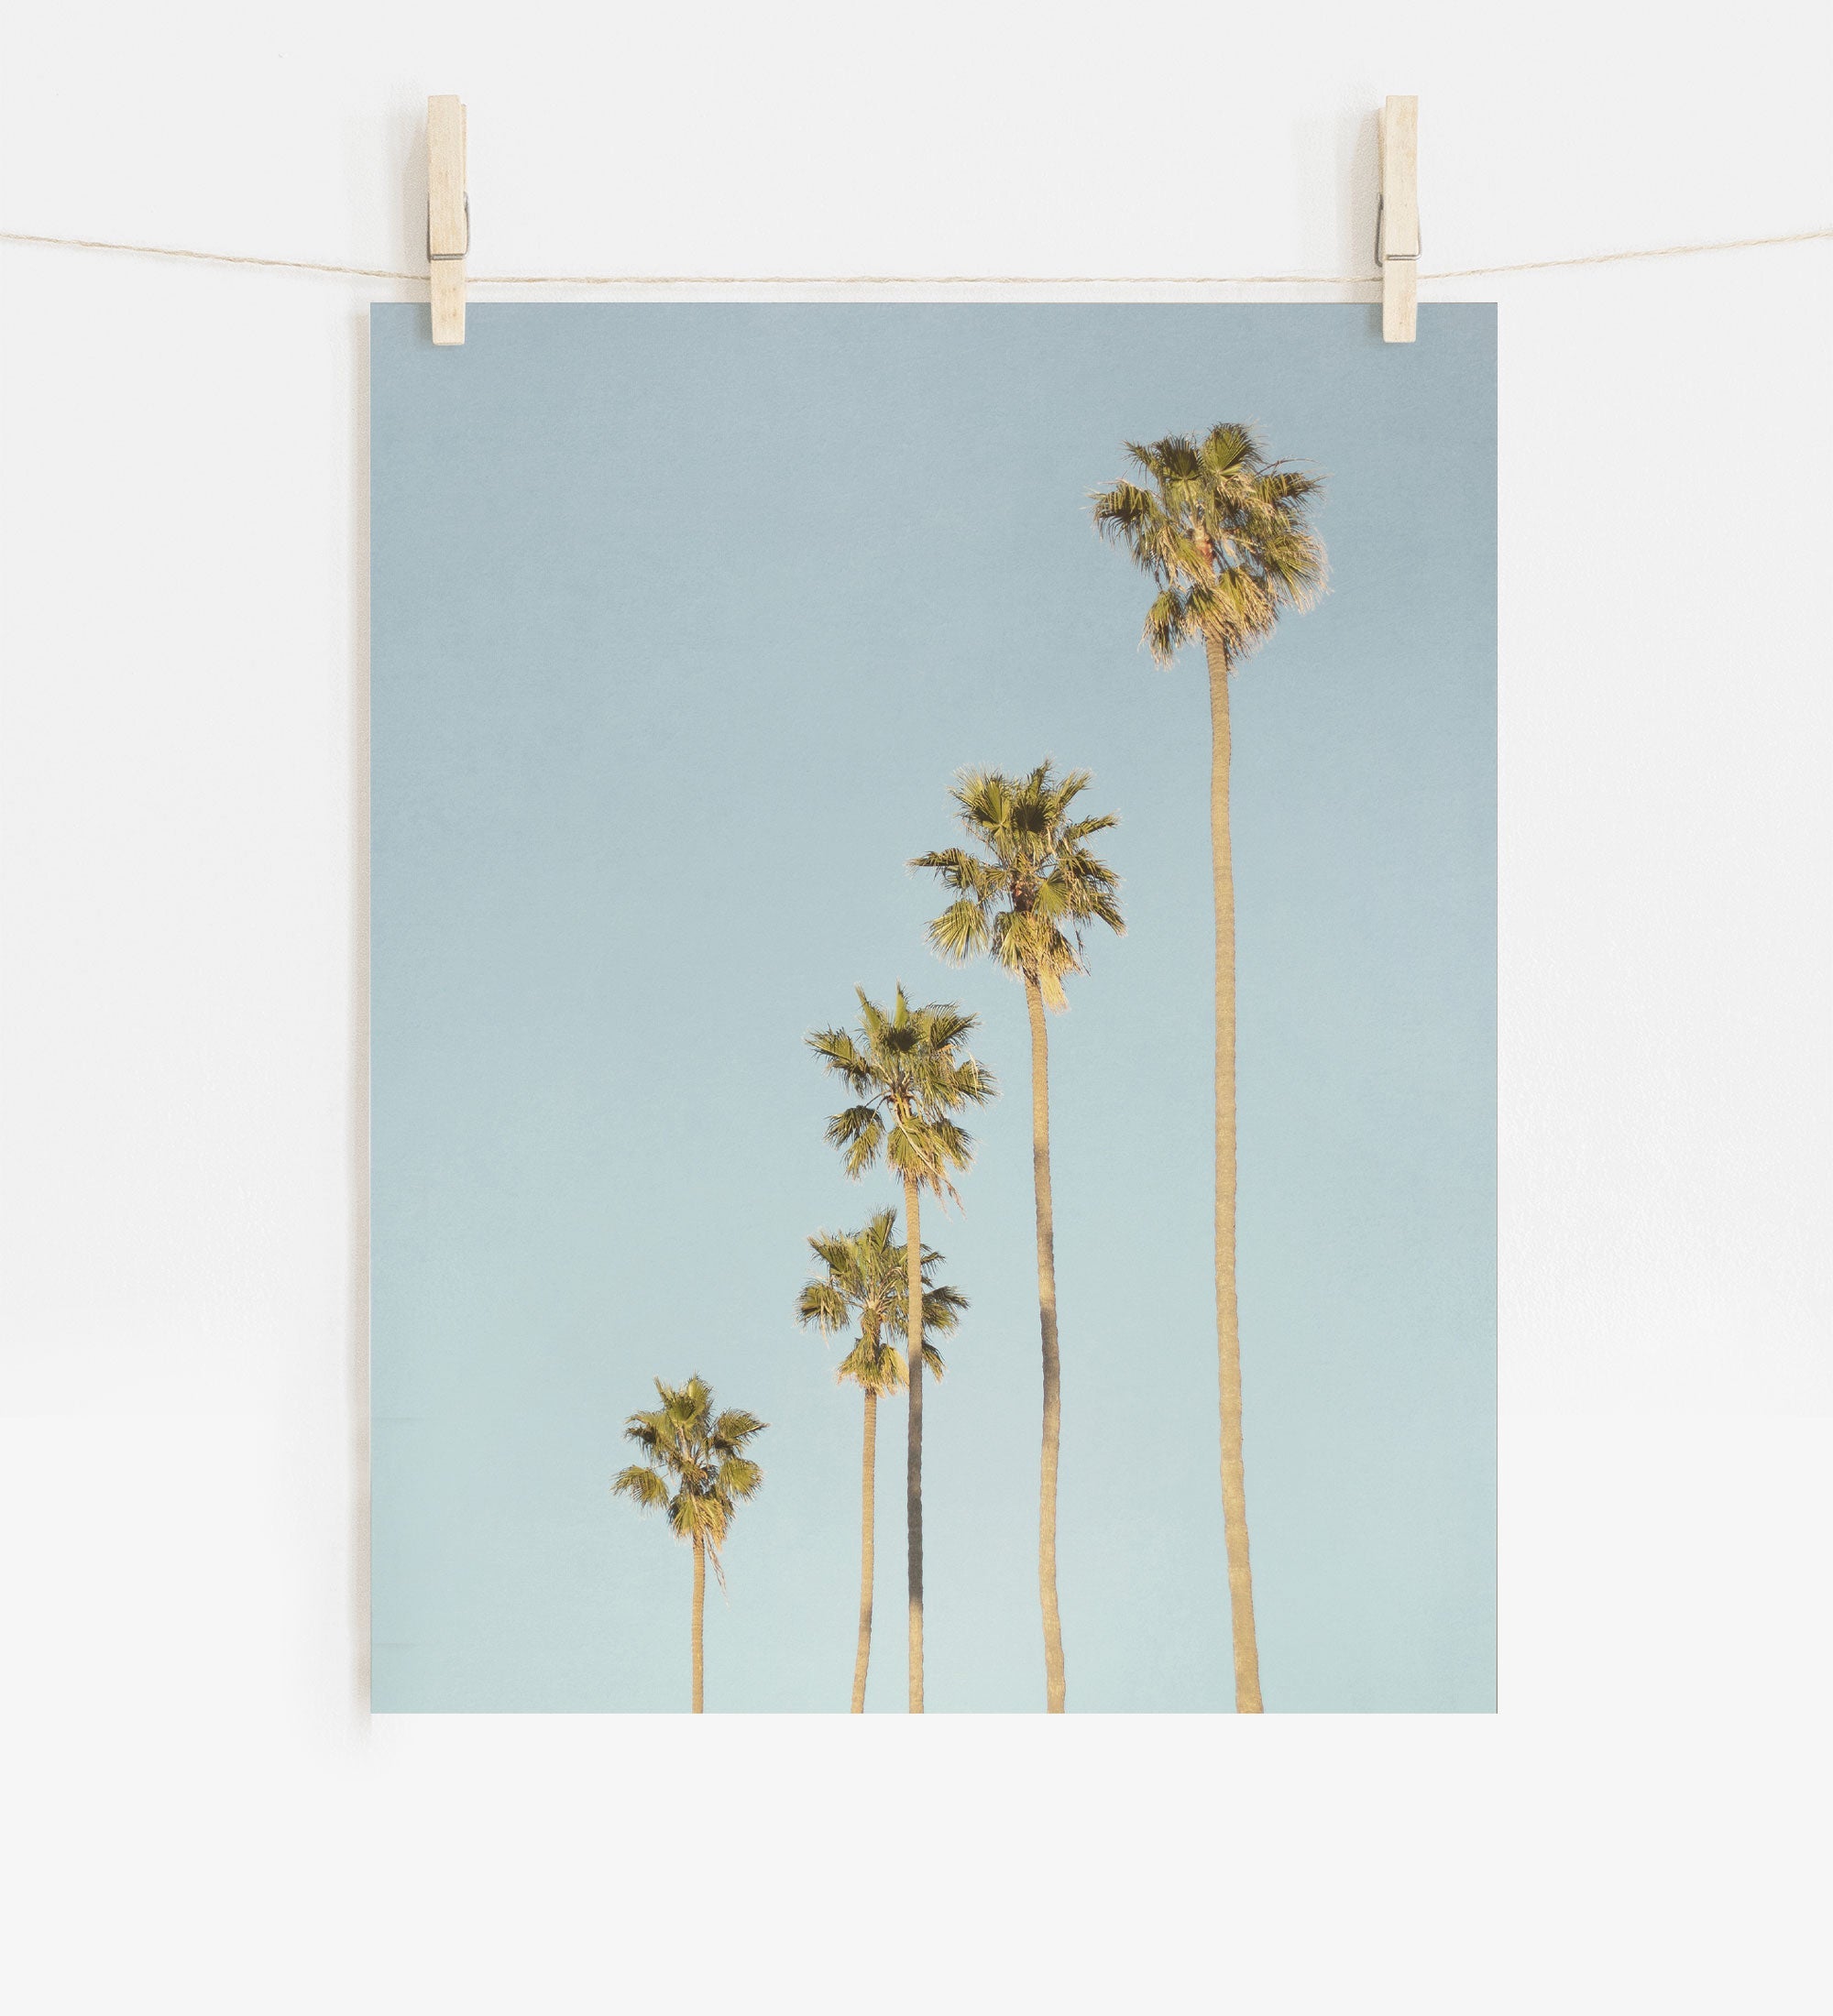 A photo of tall palm trees against a blue sky, clipped to a string with two wooden clothespins in California style, suggesting the image is hanging for display is the Offley Green Los Angeles Palm Tree Photographic Print 'Palm Tree Steps'.